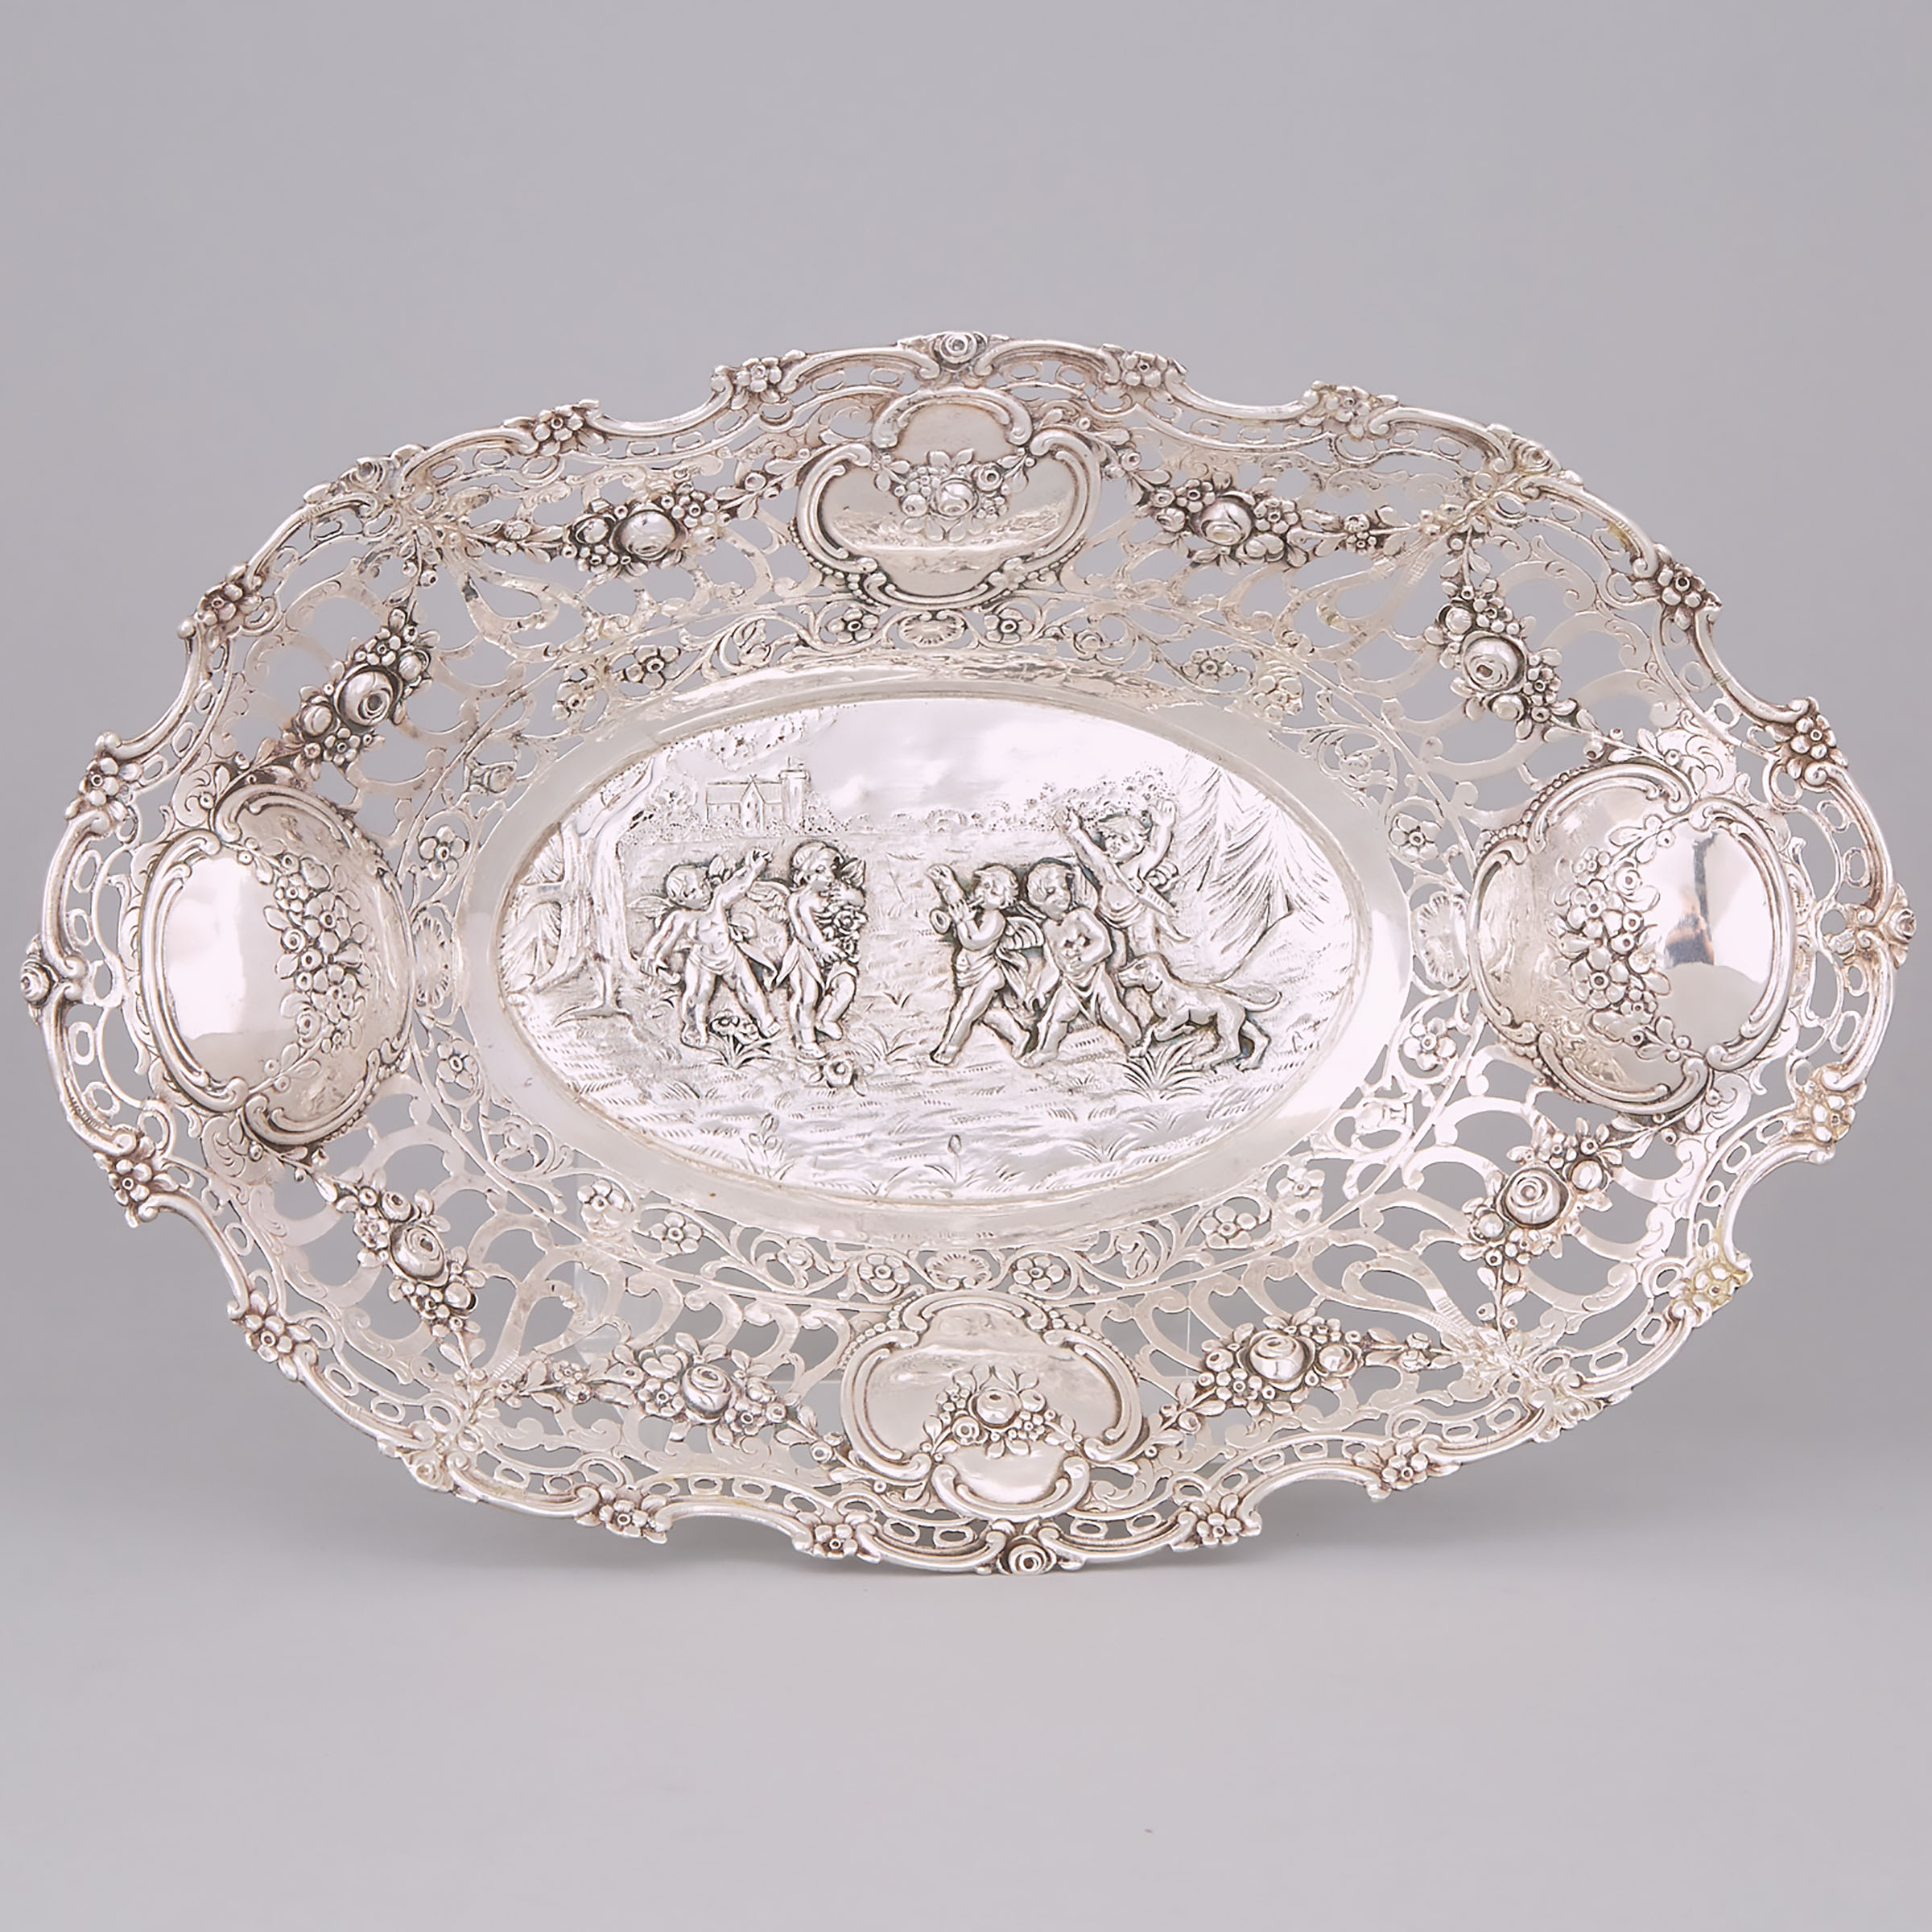 German Silver Moulded and Pierced Oval Dish, early 20th century